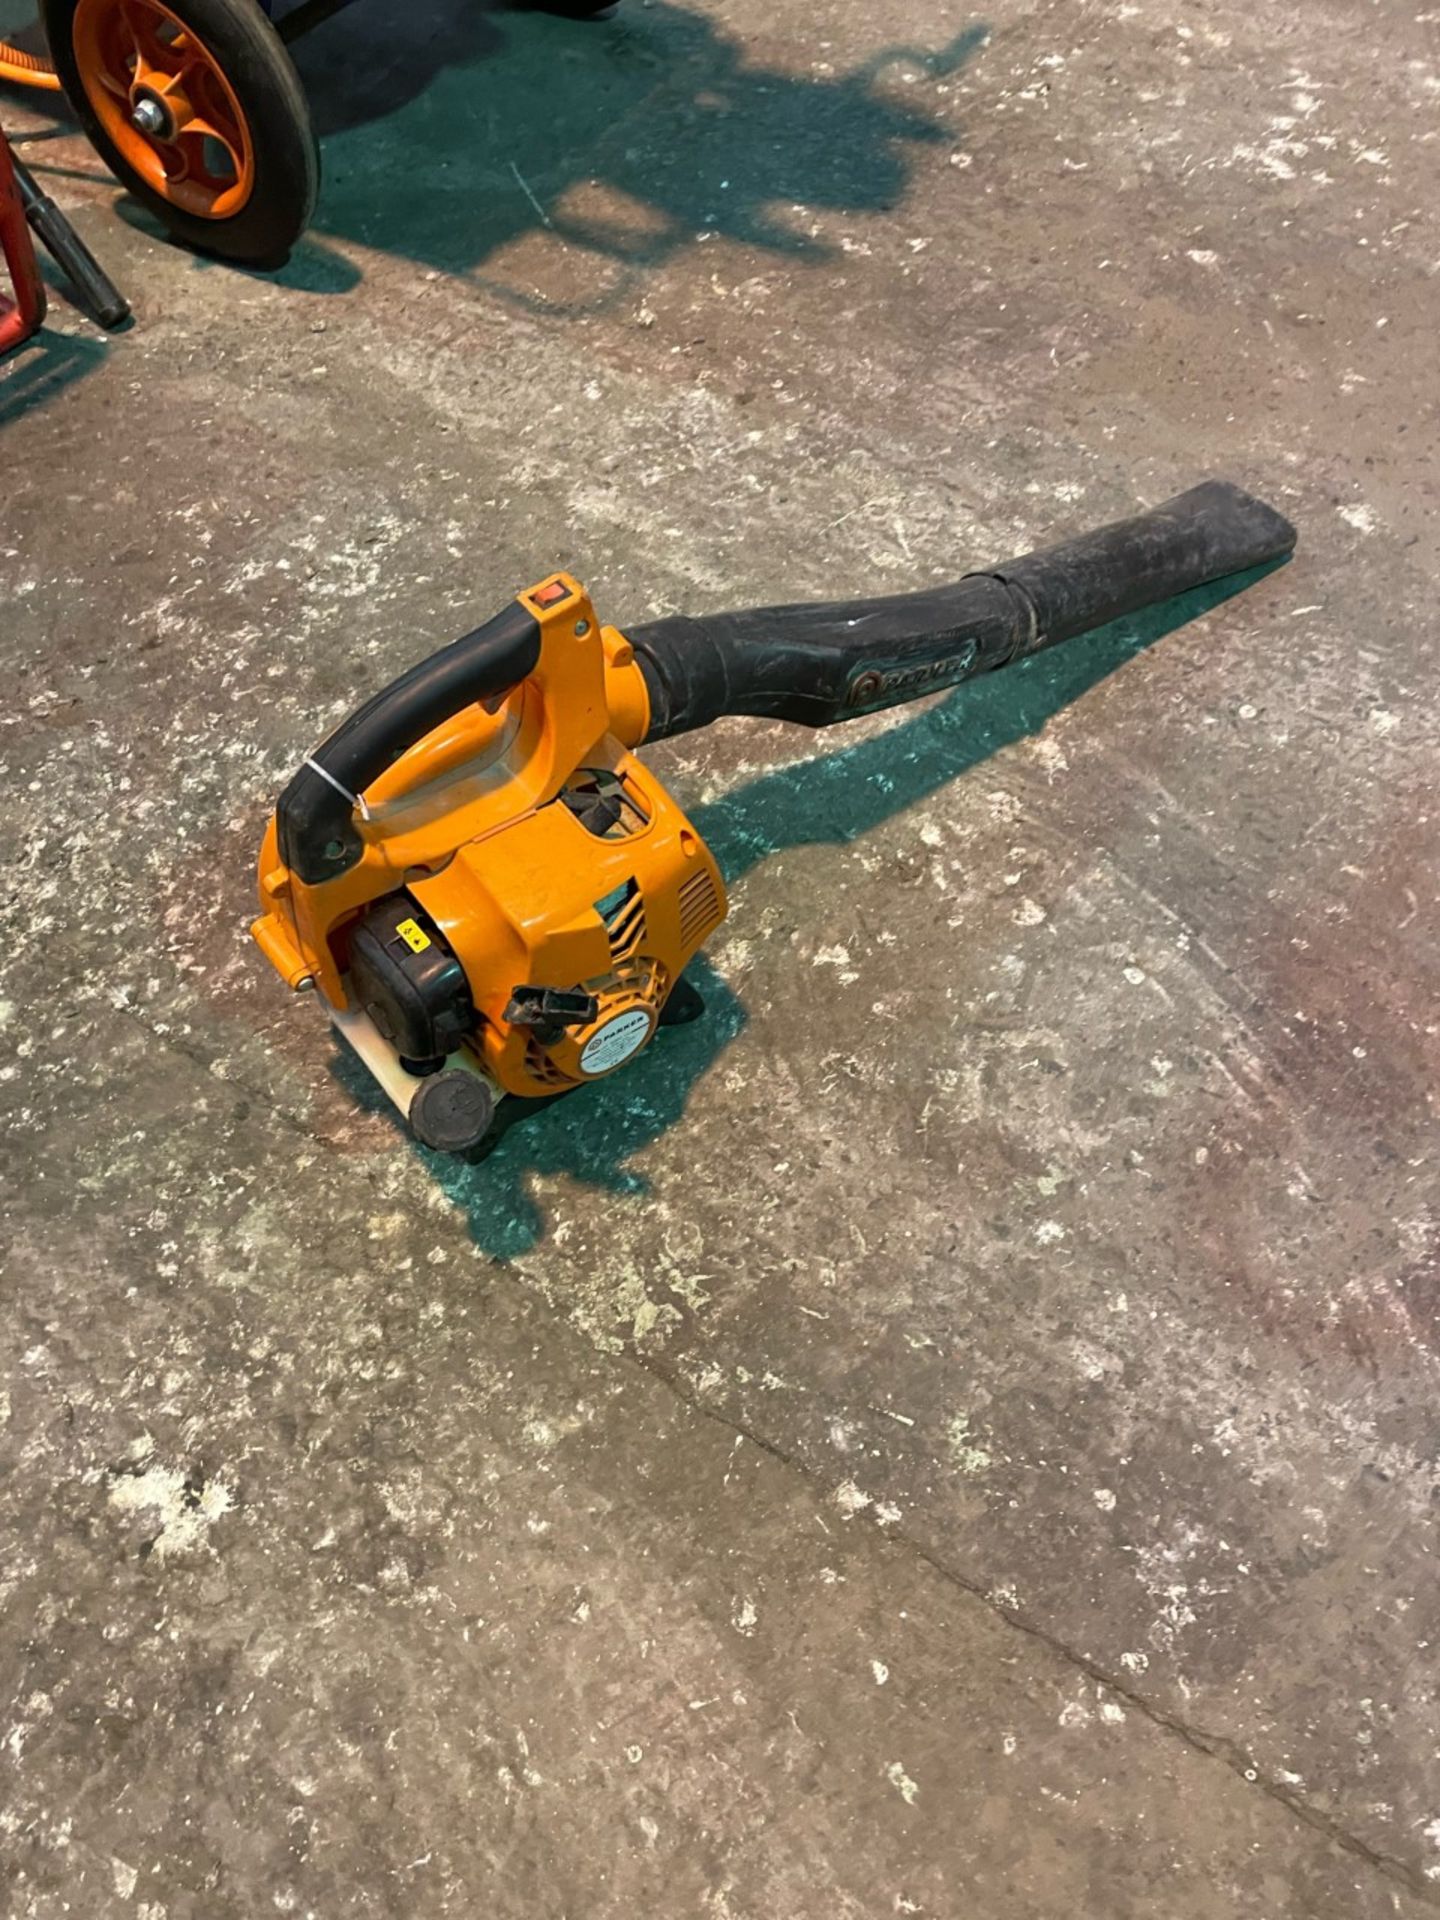 Parker leaf blower. Runs but could do with a service